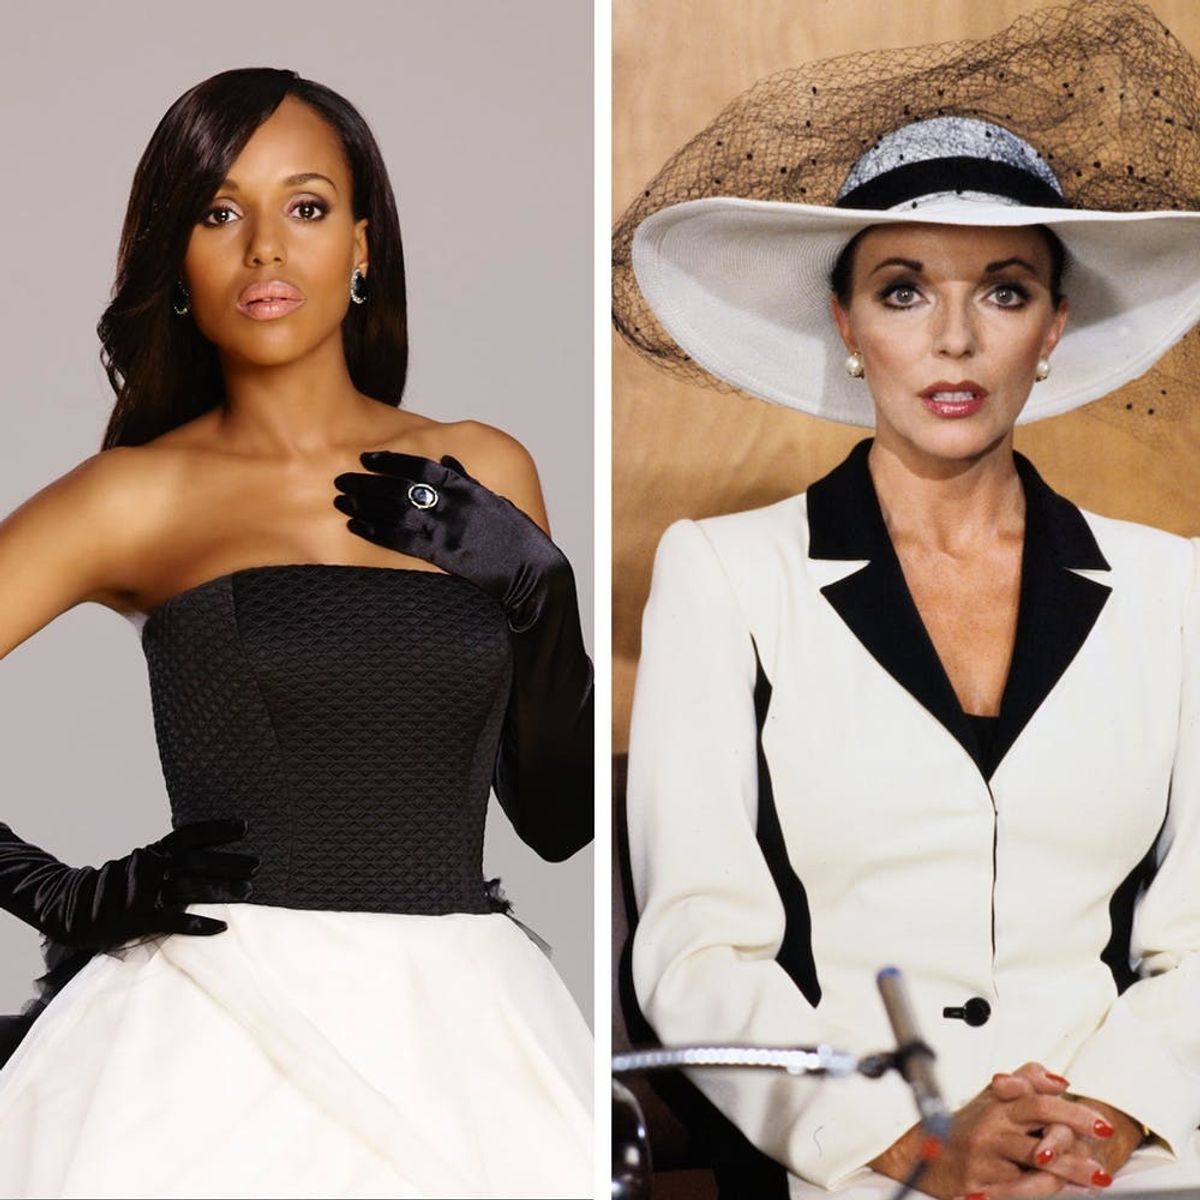 17 Movie and TV Characters That Prove Style Gets Better With Age